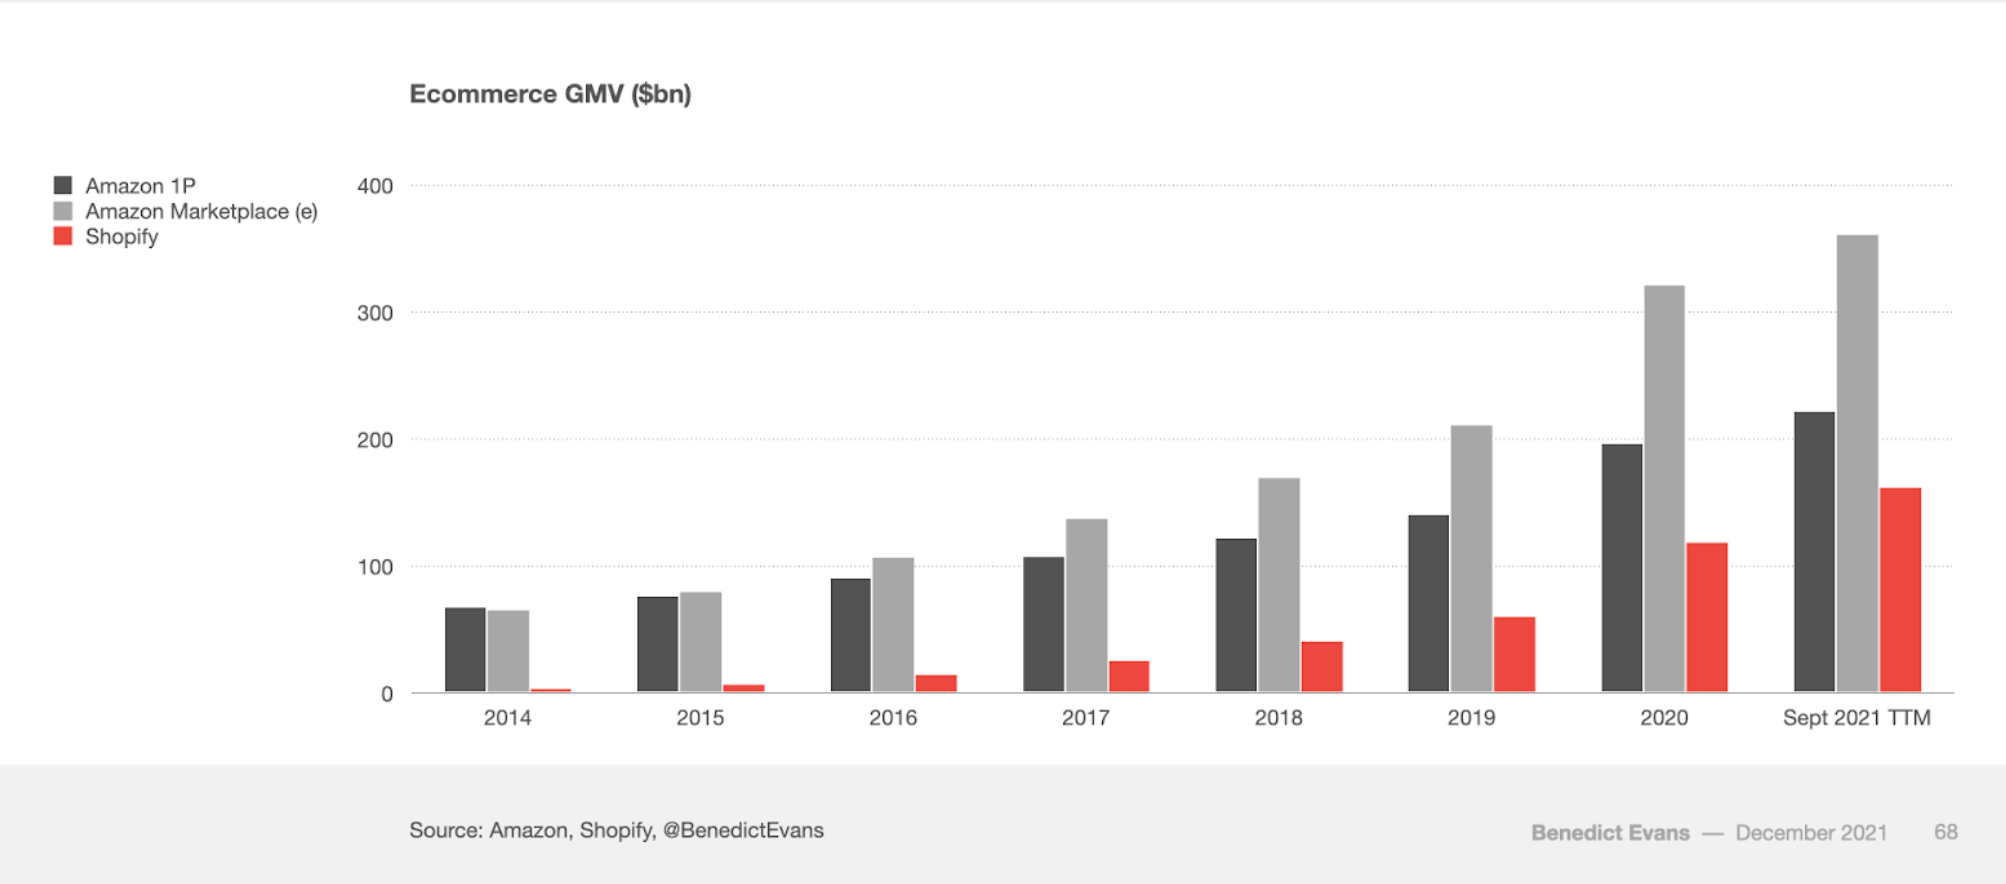 Graph outlining eCommerce GMV growth year-over-year